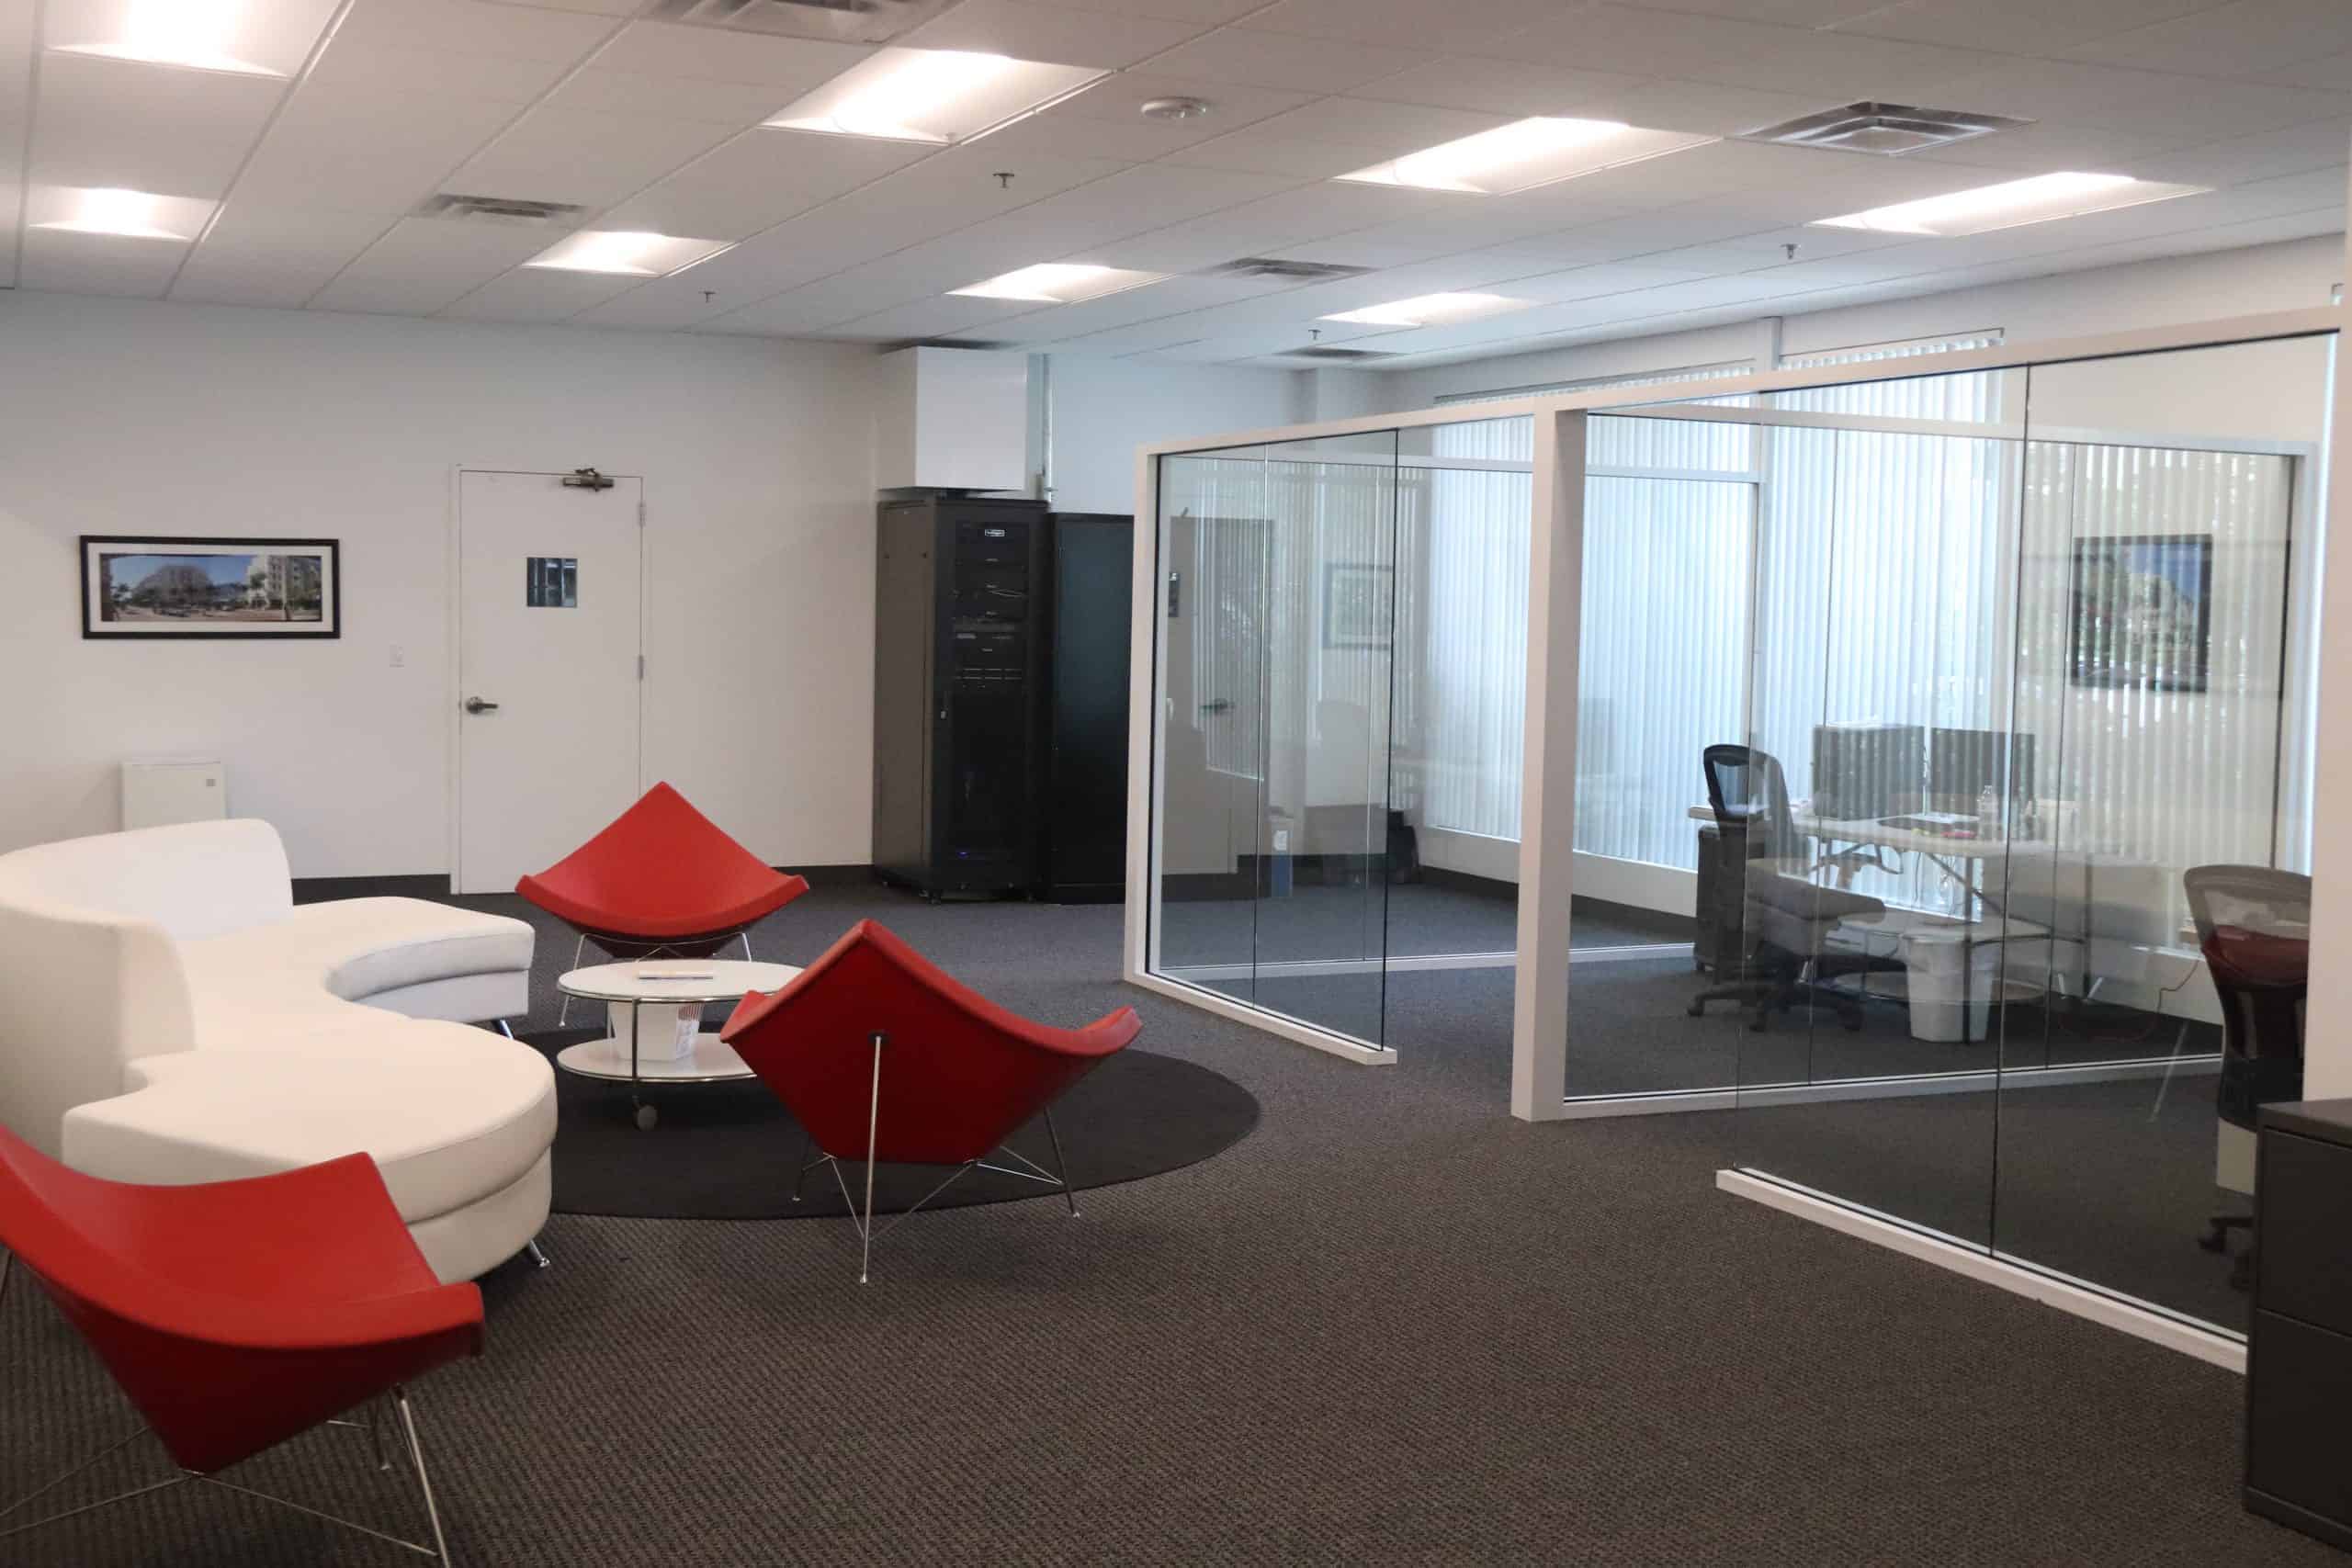 Side view of interior glass office wall partitions with office setups inside with white and red chairs in a lobby area.